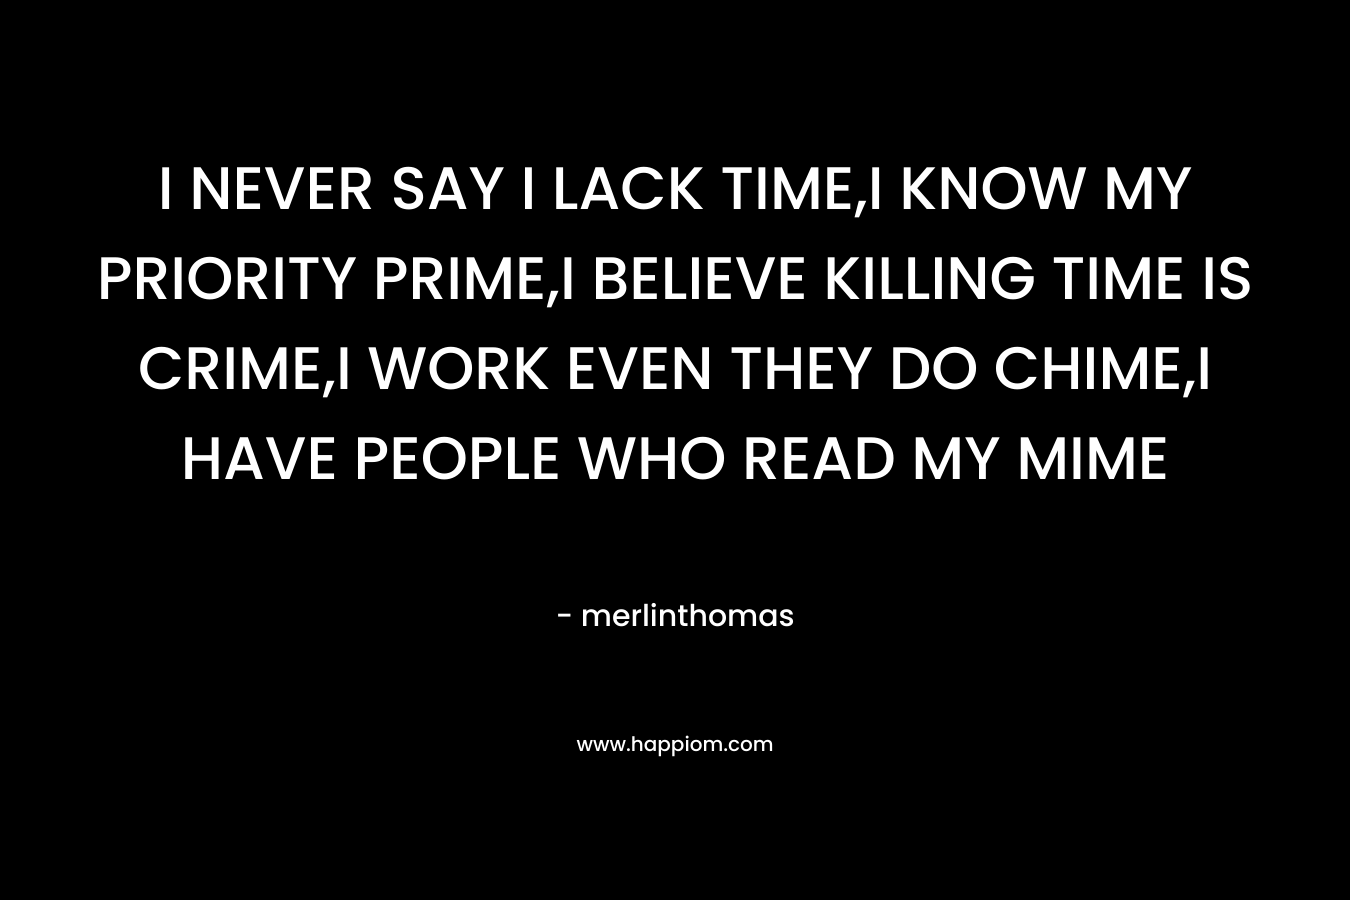 I NEVER SAY I LACK TIME,I KNOW MY PRIORITY PRIME,I BELIEVE KILLING TIME IS CRIME,I WORK EVEN THEY DO CHIME,I HAVE PEOPLE WHO READ MY MIME – merlinthomas